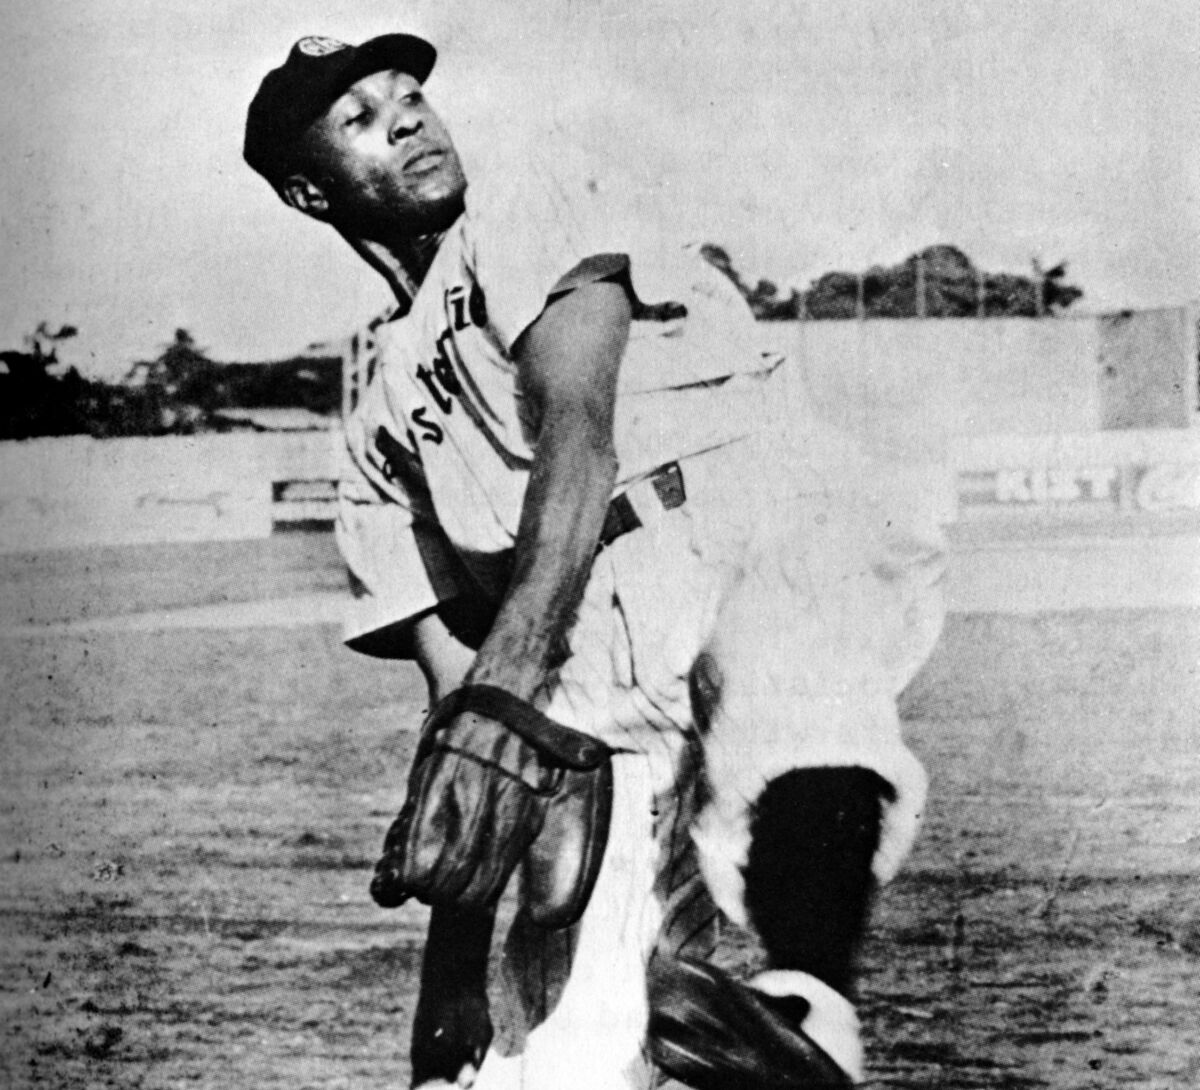 Chet Brewer, pitcher for the Estrellas Orientales of the Dominican Republic, in 1937.